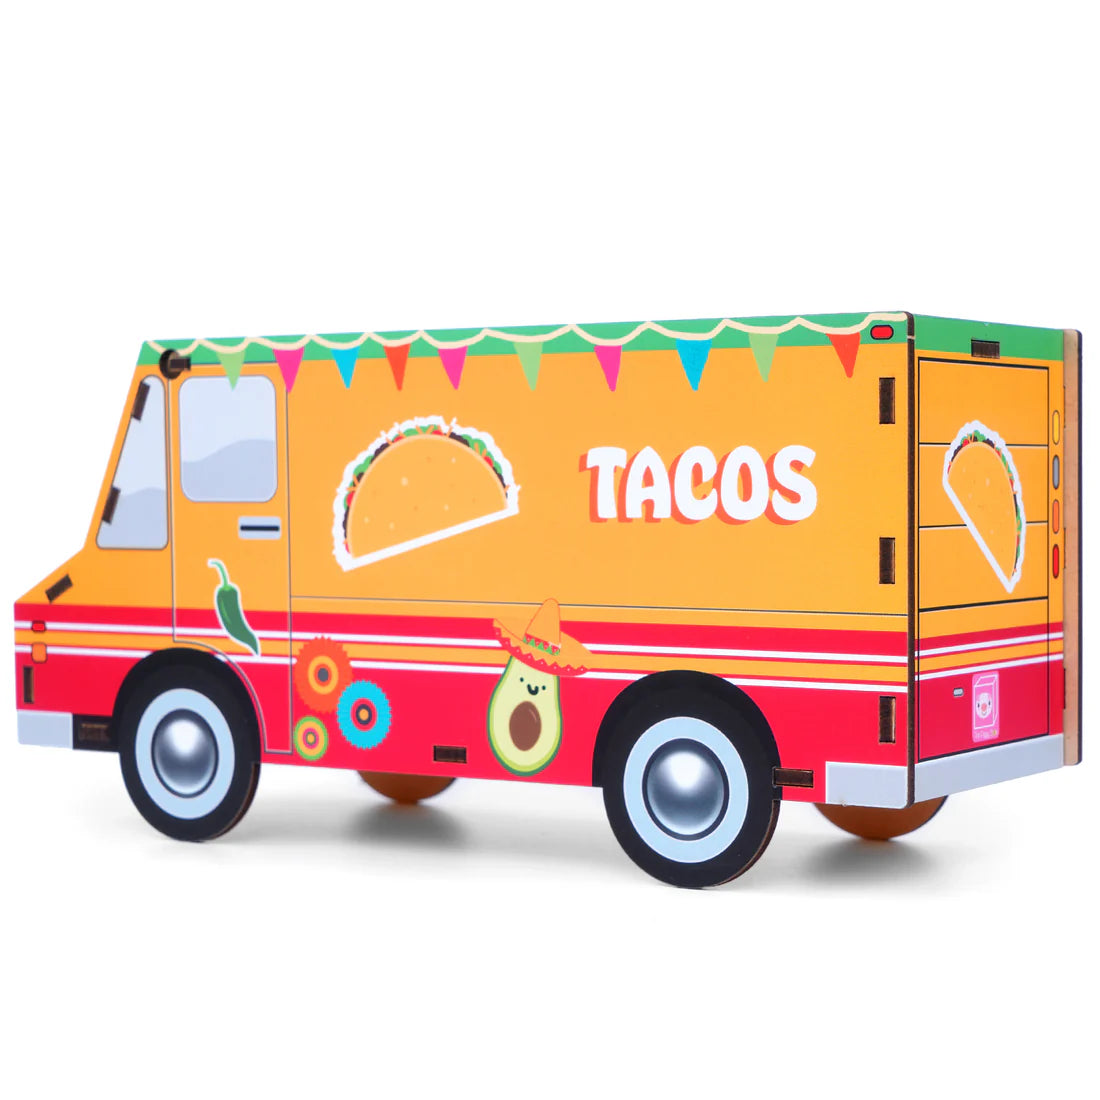 Taco truck piggy bank - 3/4 view showing side and rear.